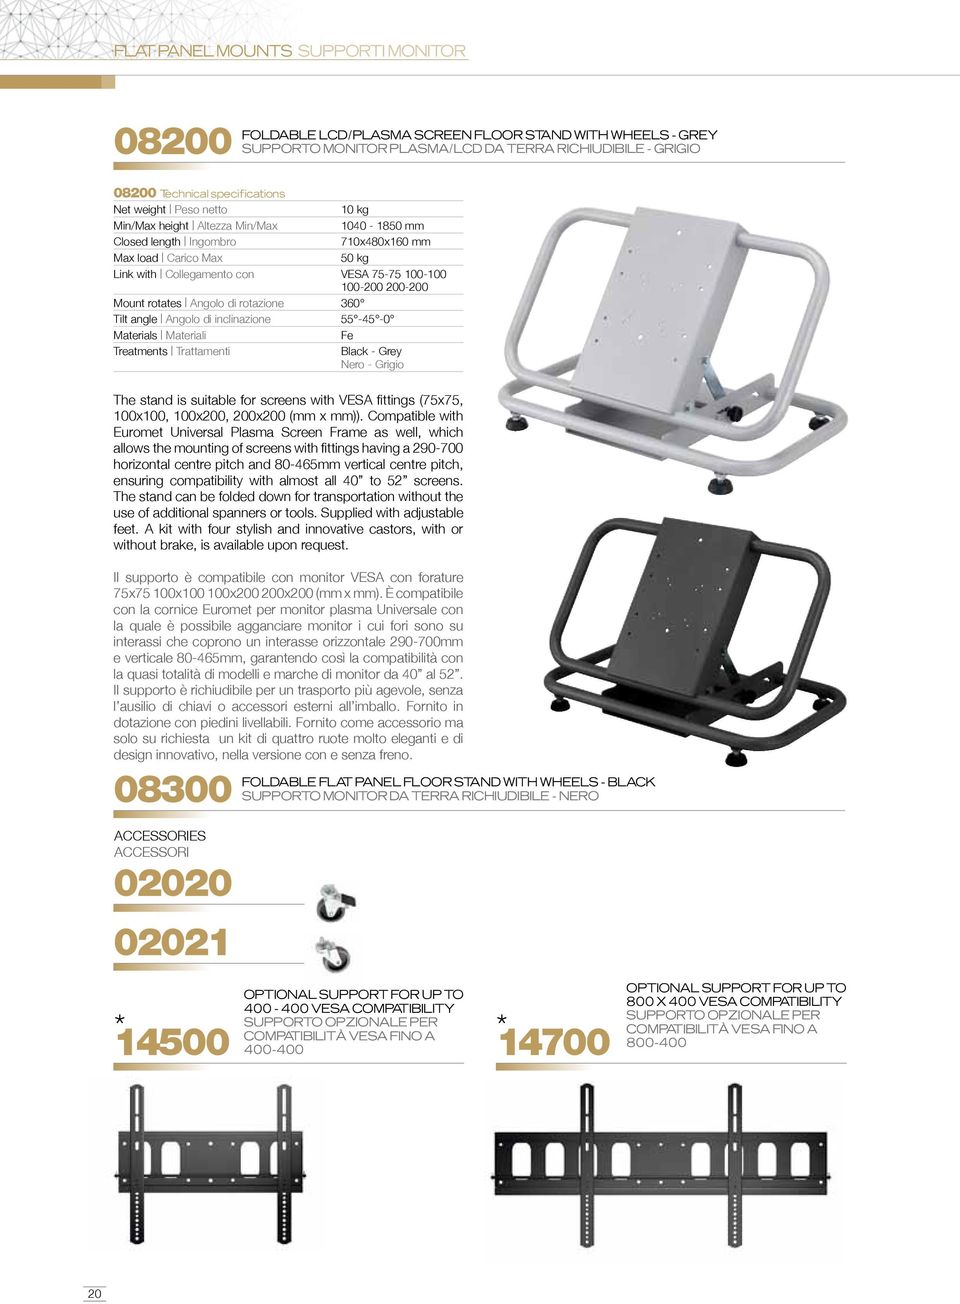 - Grigio The stand is suitable for screens with VESA fittings (75x75, 100x100, 100x200, 200x200 (mm x mm)).